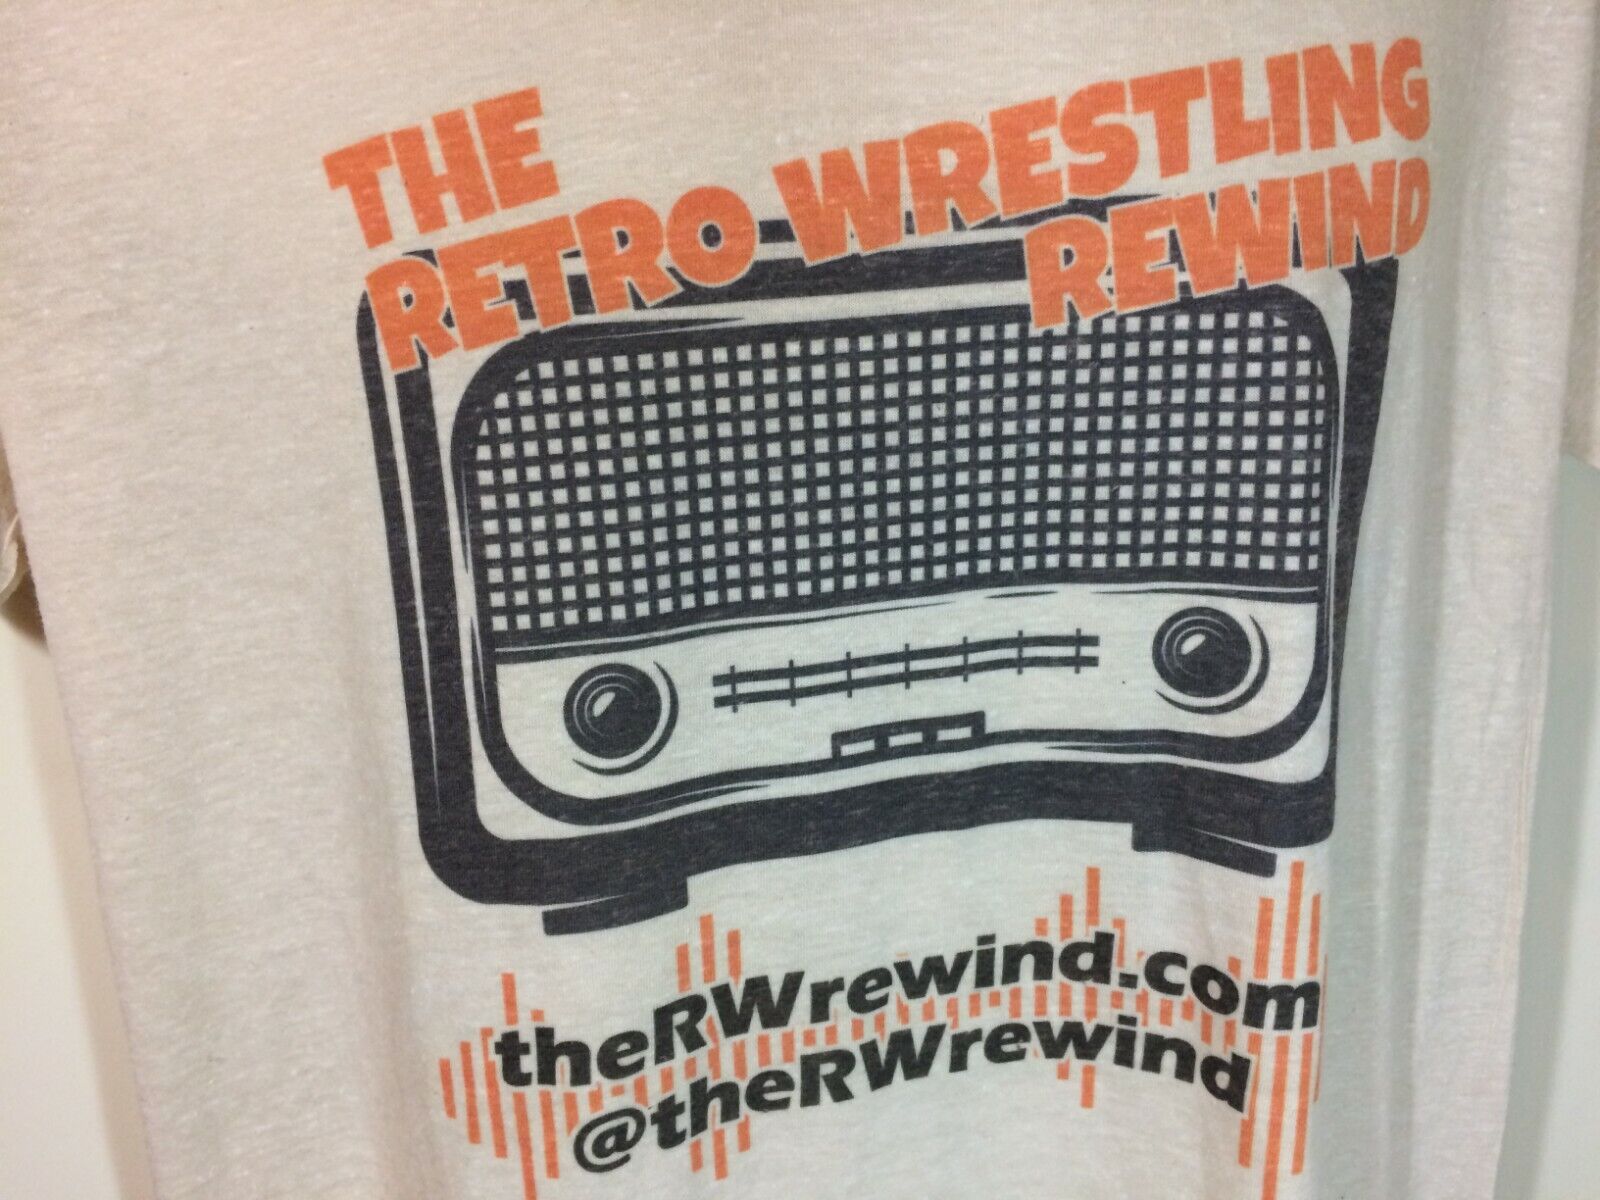 The RETRO WRESTLING REWIND PODCAST -Adult T-Shirt… - image 2